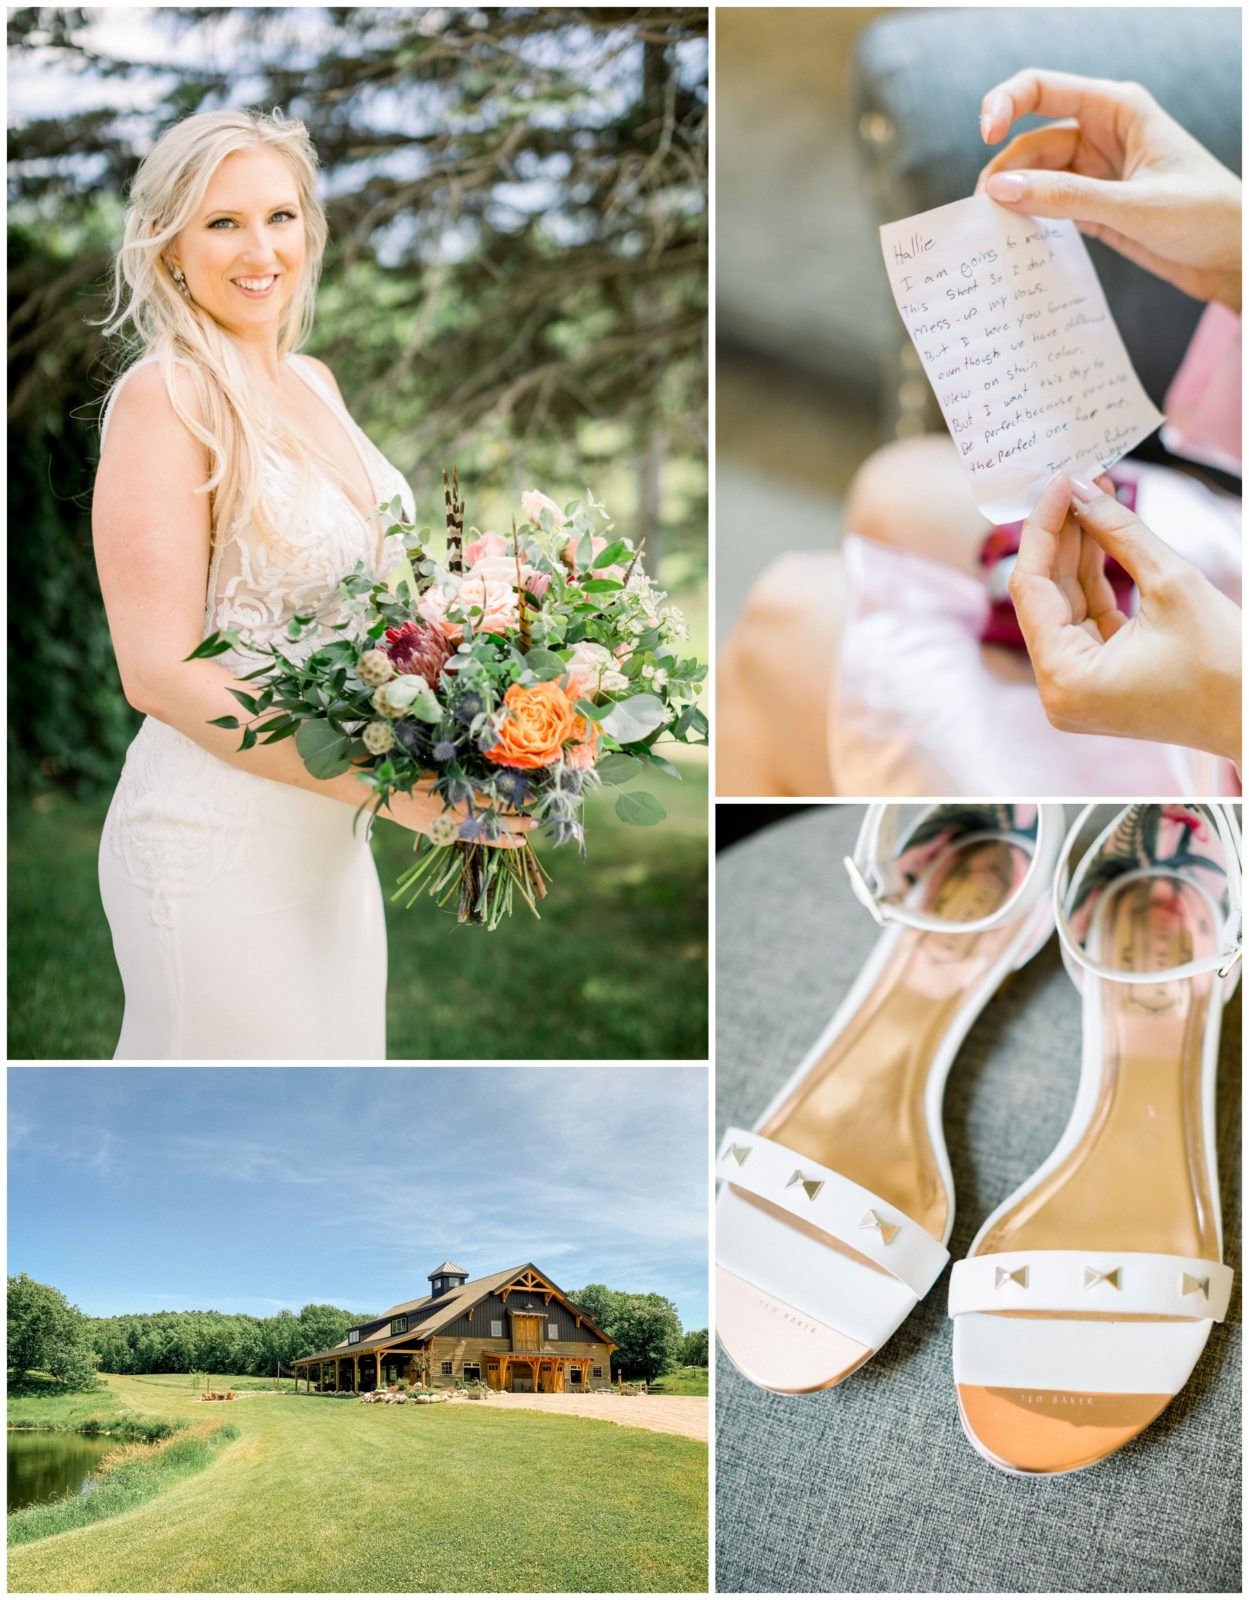 The Barn at Stoney Hills Wedding Venue and bridal details